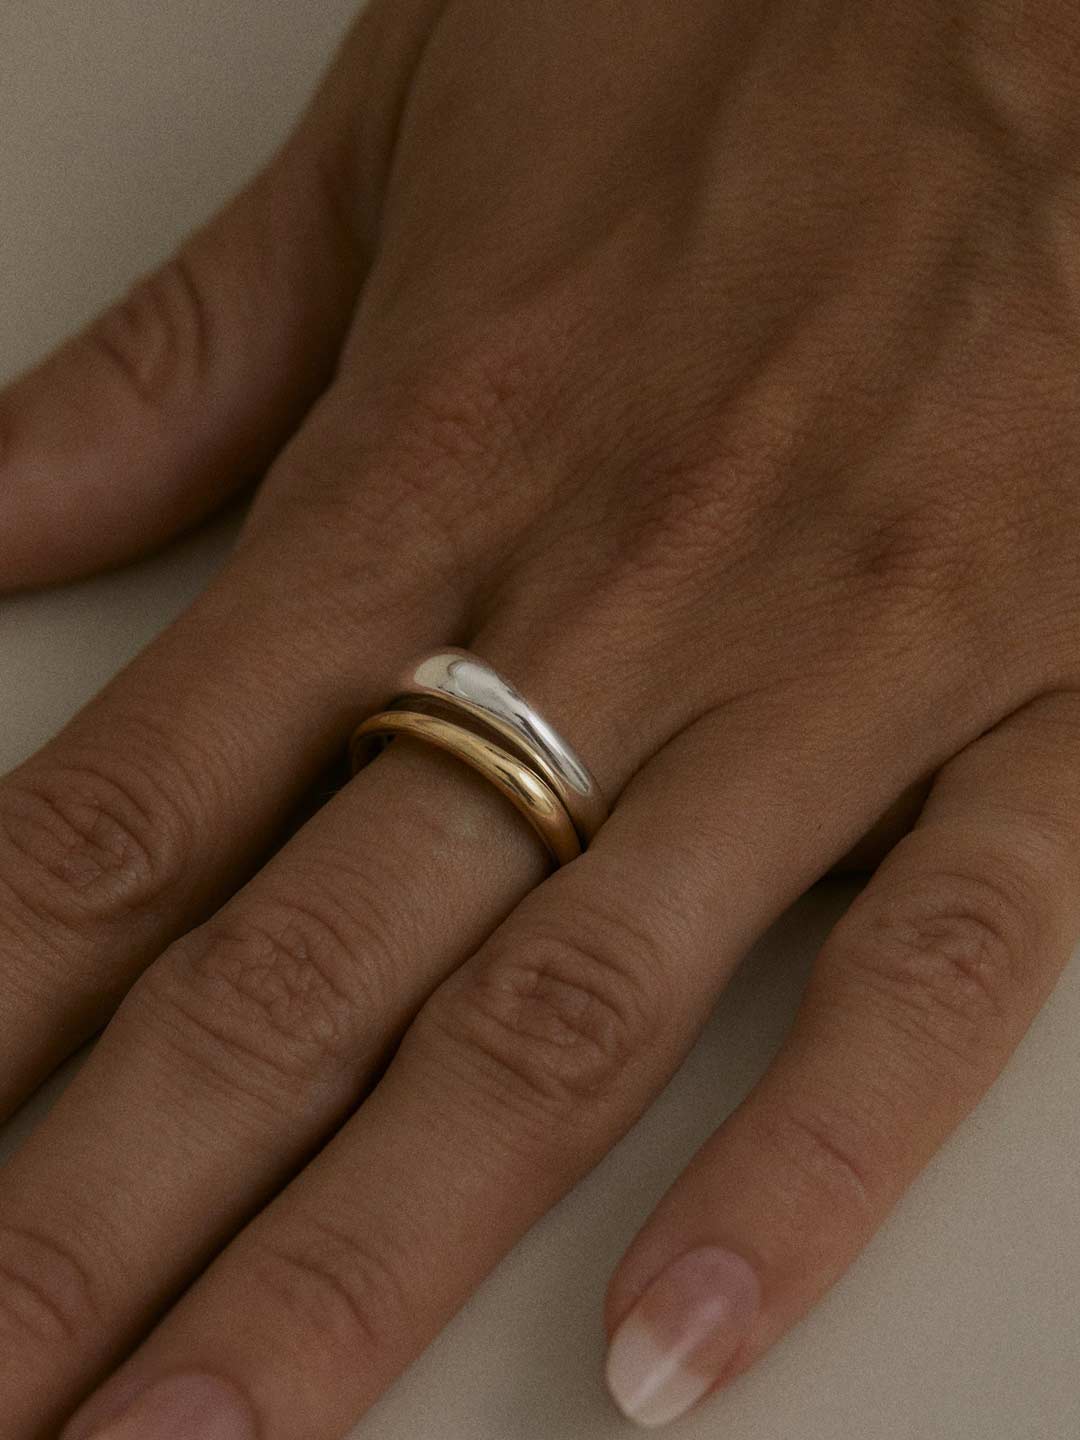 Dueto Ring - Silver/Gold